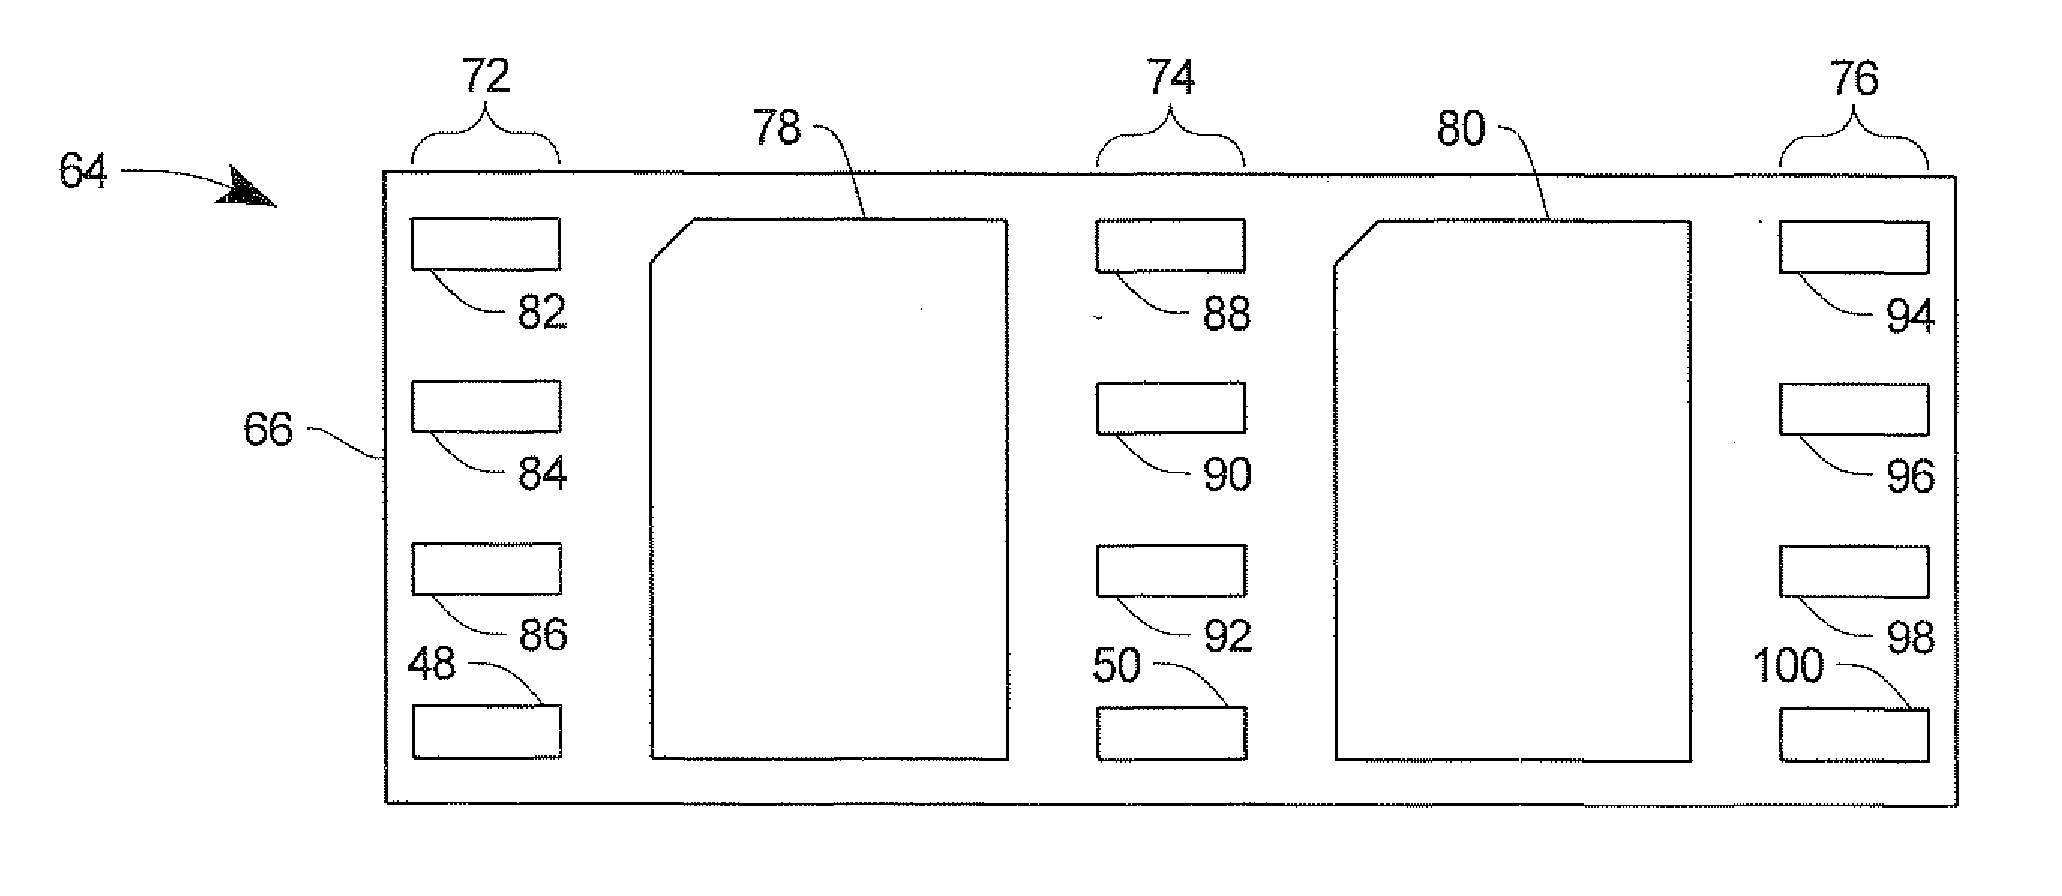 Dual side cooling integrated power device package and module and methods of manufacture